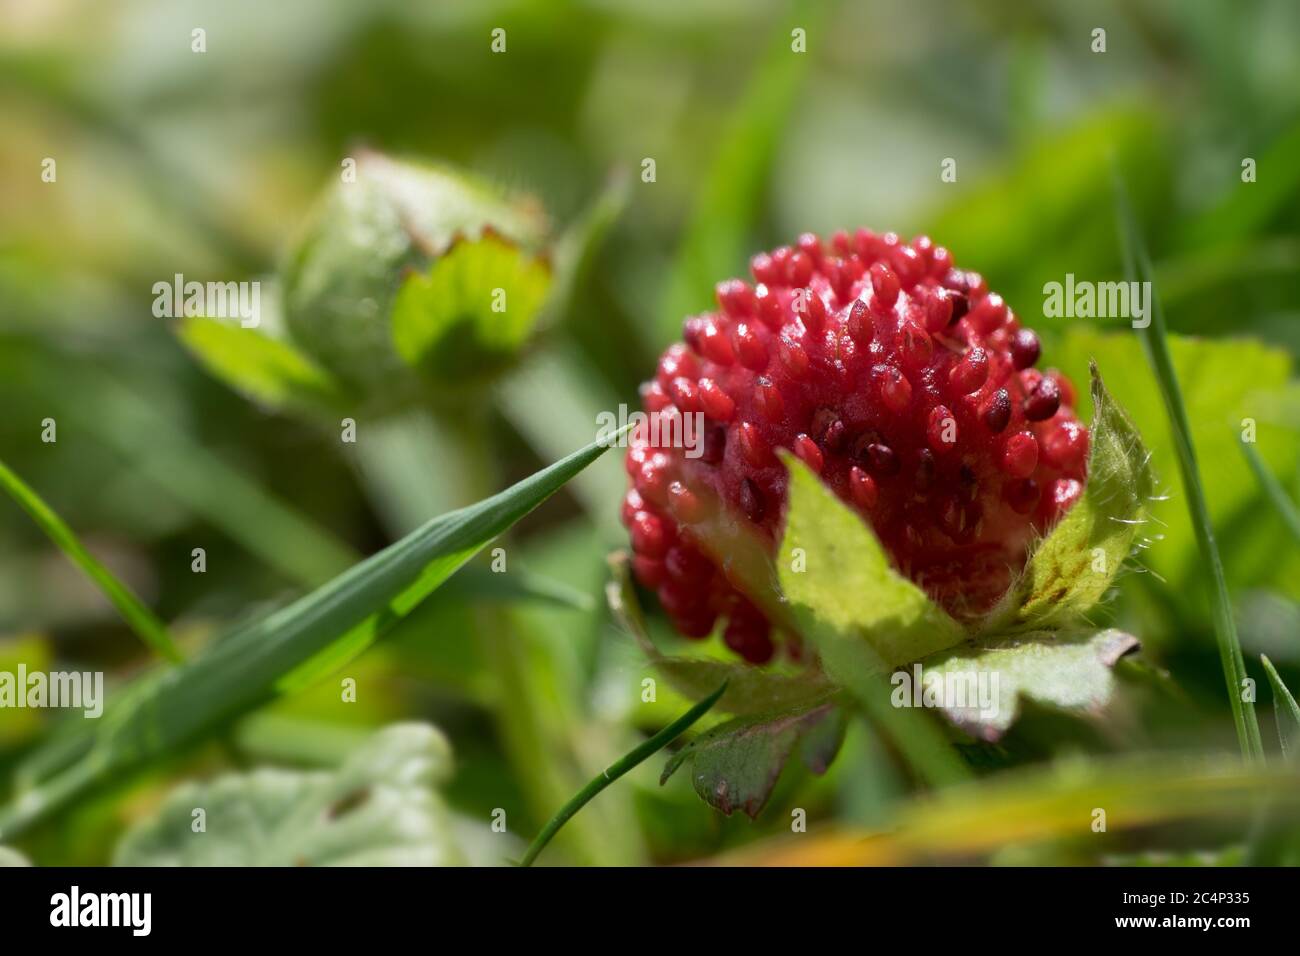 Fragaria vesca or wild strawberry with green leafs. Horizontal photo with a very narrow depth of field Stock Photo